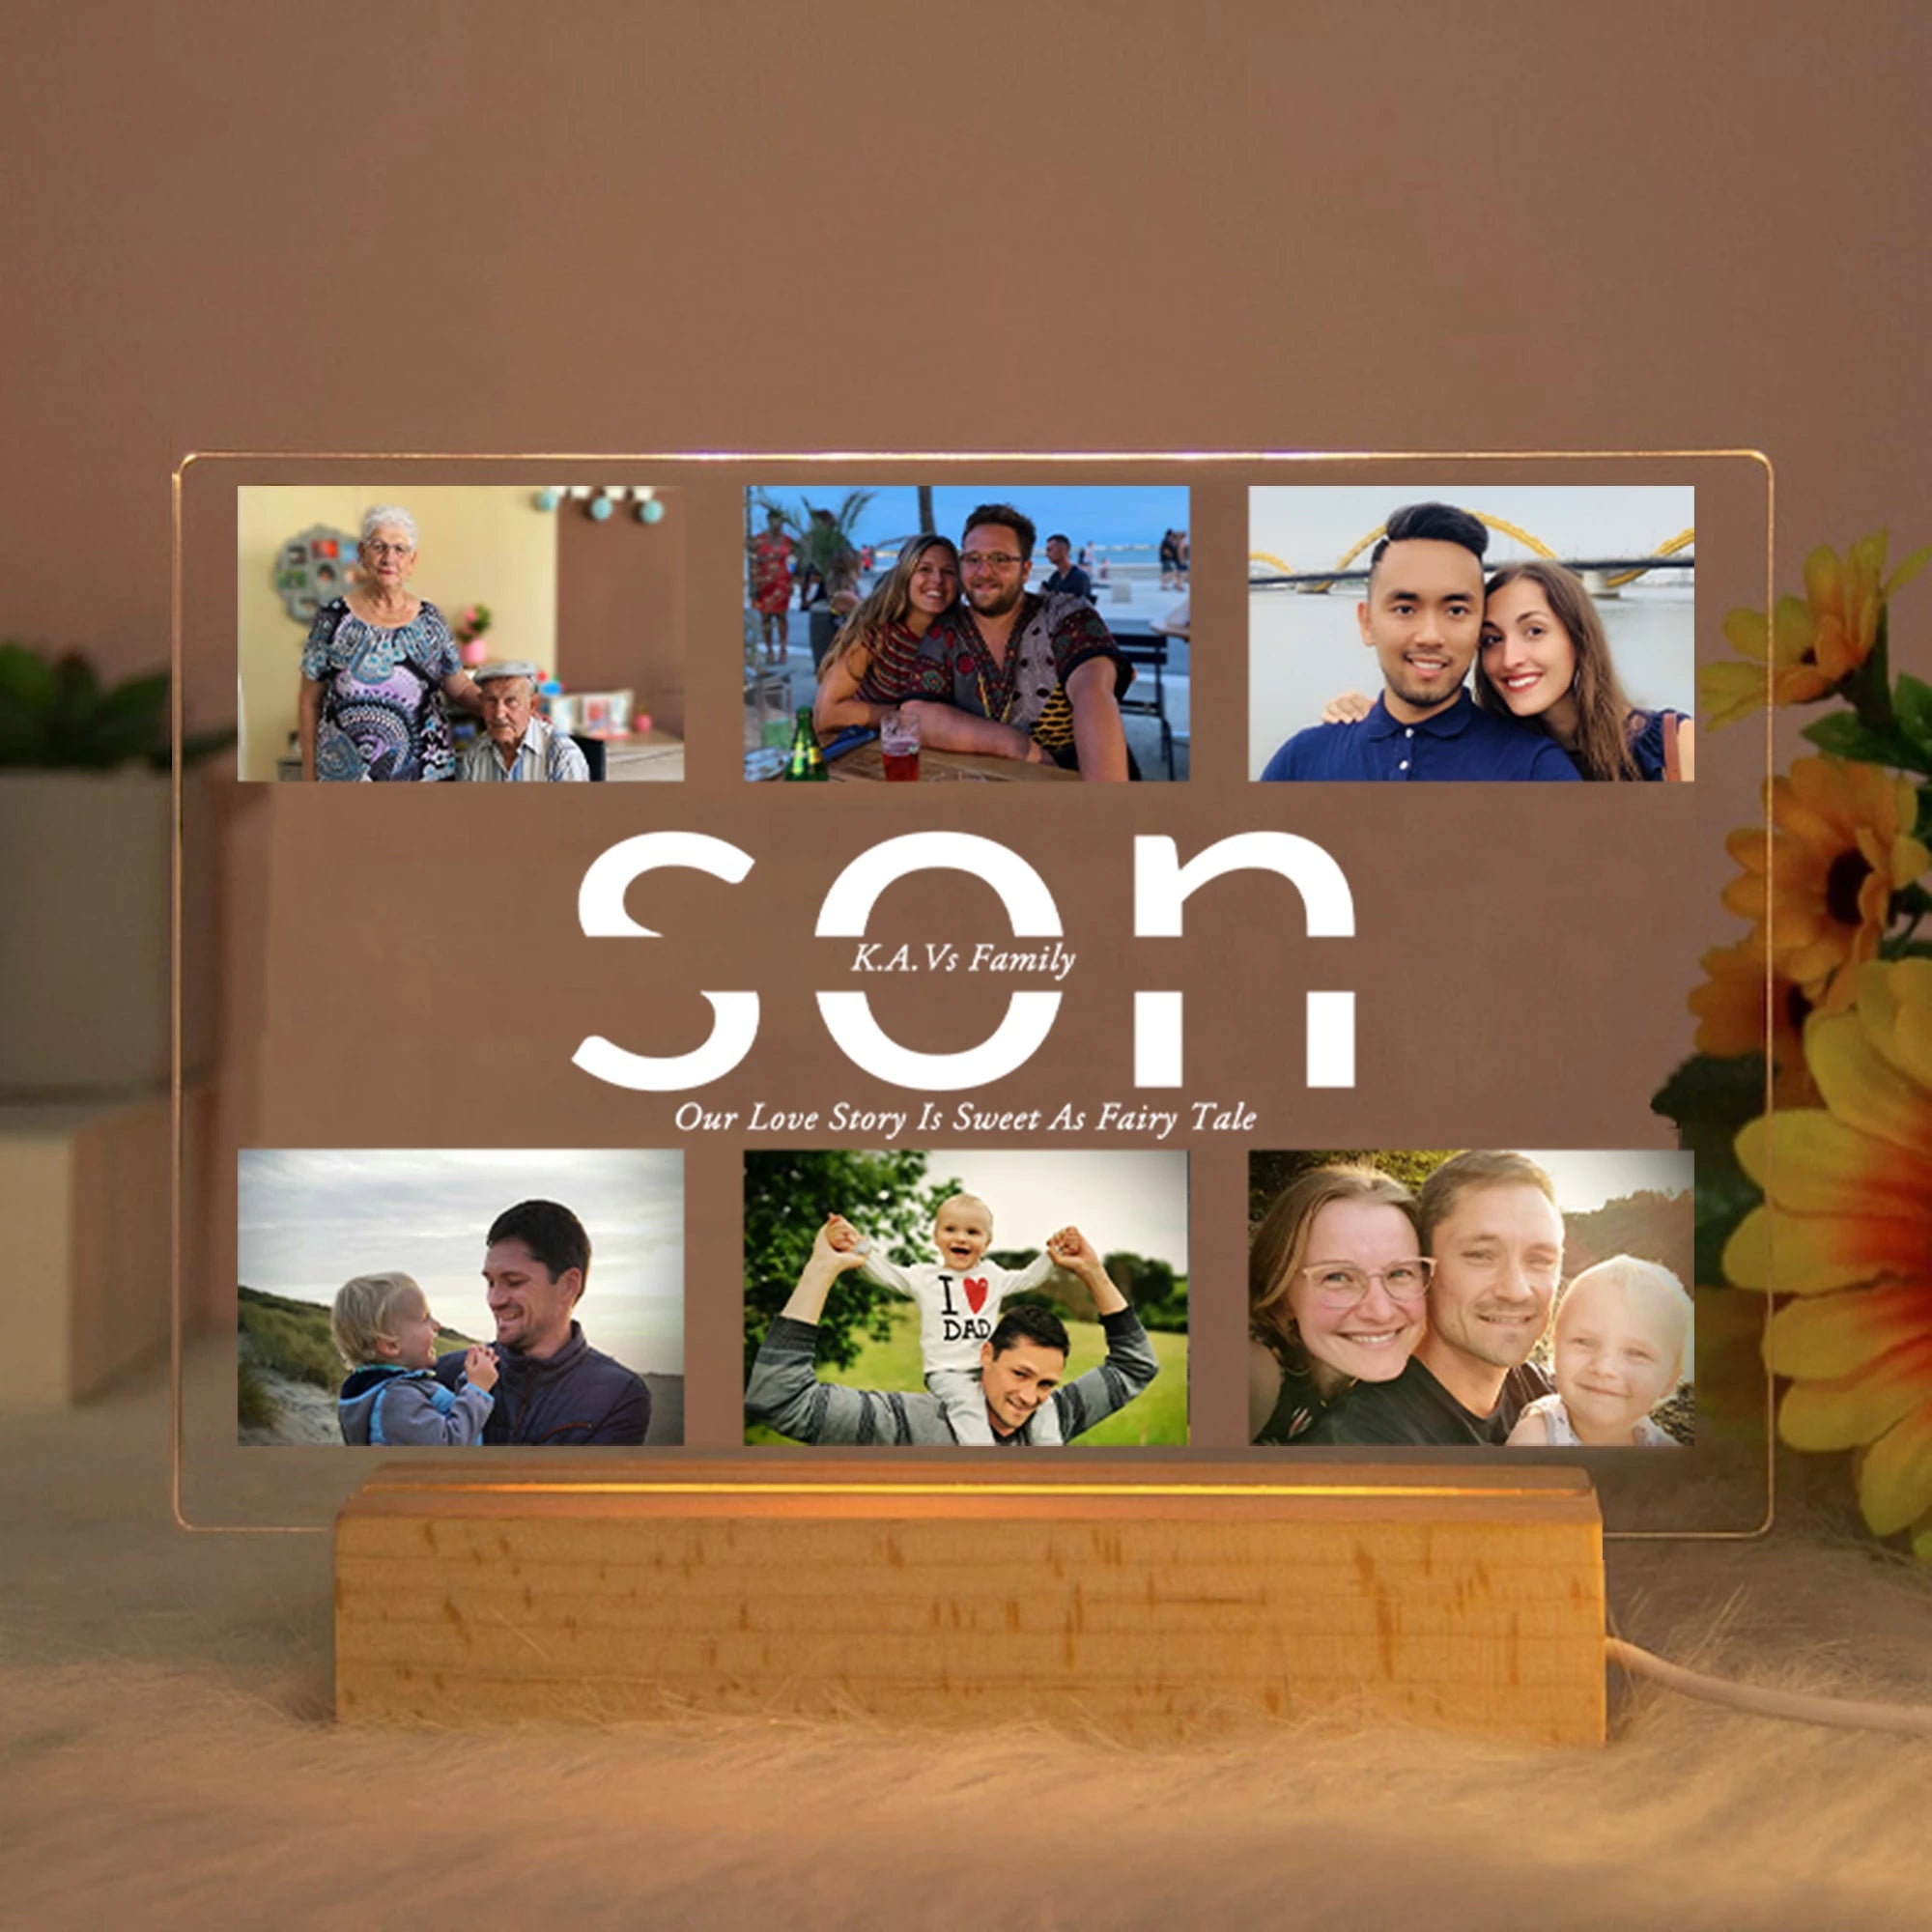 Personalized Acrylic Lamp with Custom Photo and Text - Ideal Bedroom Night Light for MOM DAD LOVE Friend Family Day Wedding Birthday Gift Present SON / Warm Light